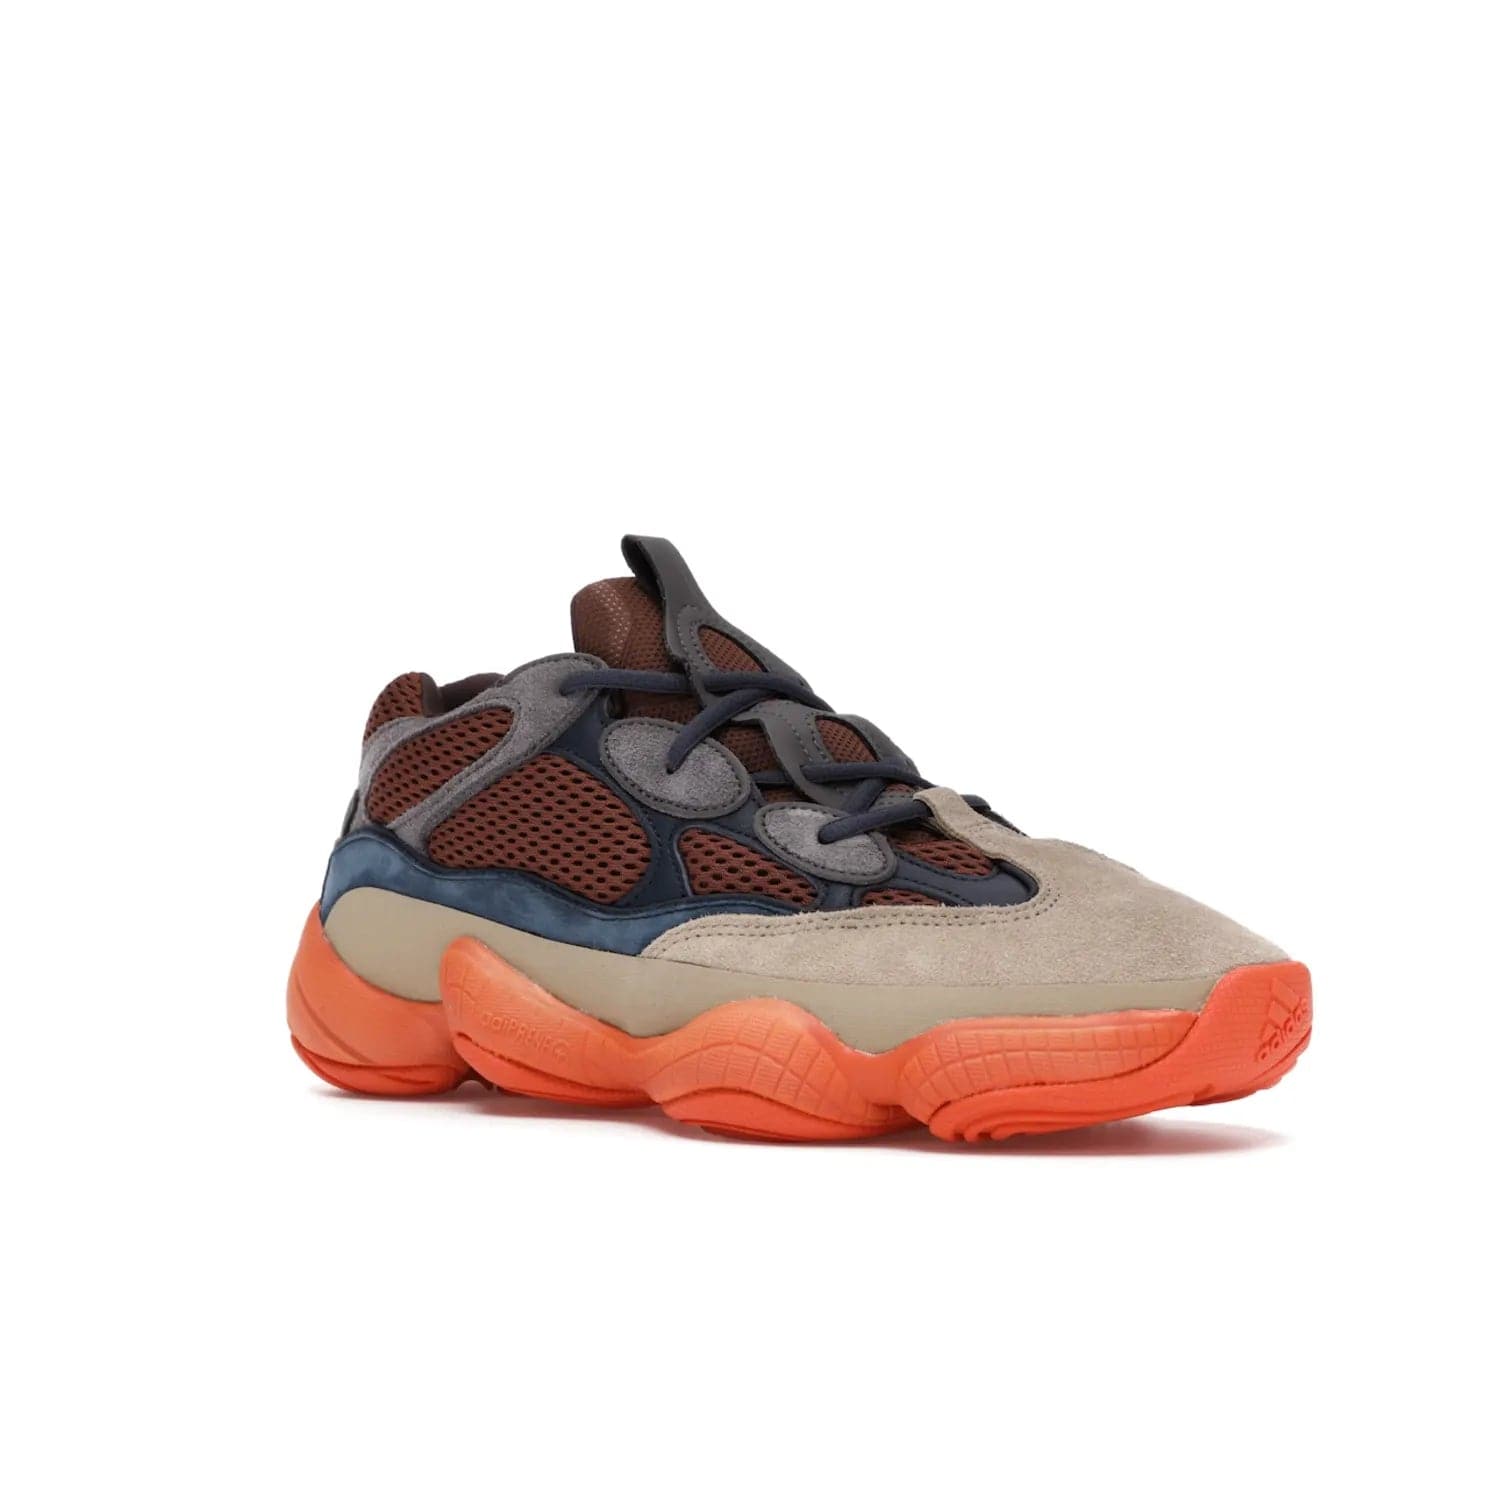 adidas Yeezy 500 Enflame - Image 5 - Only at www.BallersClubKickz.com - Step into style with the adidas Yeezy 500 Enflame. Mix of mesh, leather, and suede layered together to create tonal-brown, dark blue, & orange. Orange AdiPRENE sole provides superior cushioning & comfort. Get yours and experience maximum style.